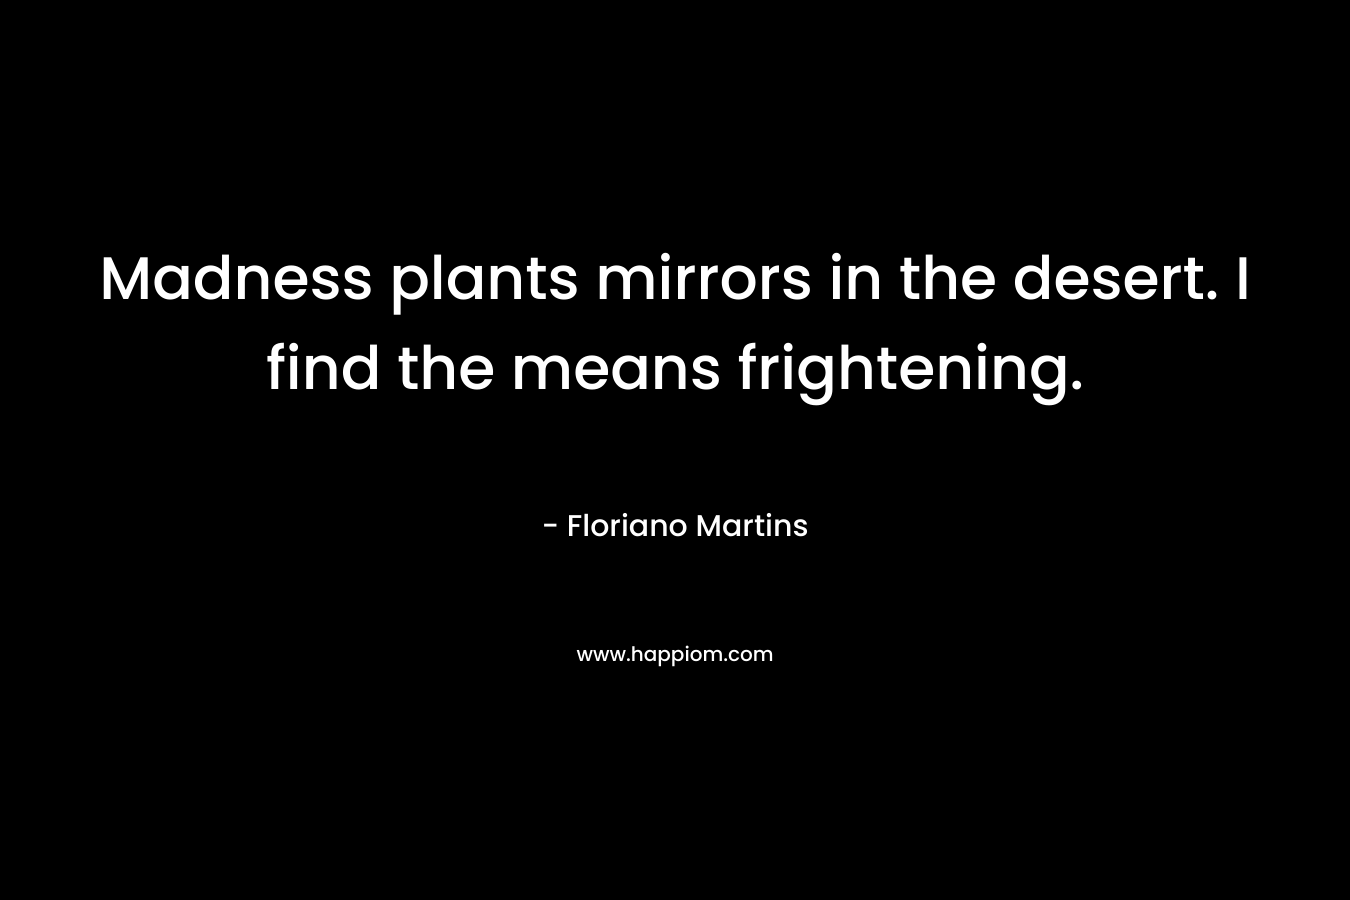 Madness plants mirrors in the desert. I find the means frightening. – Floriano Martins